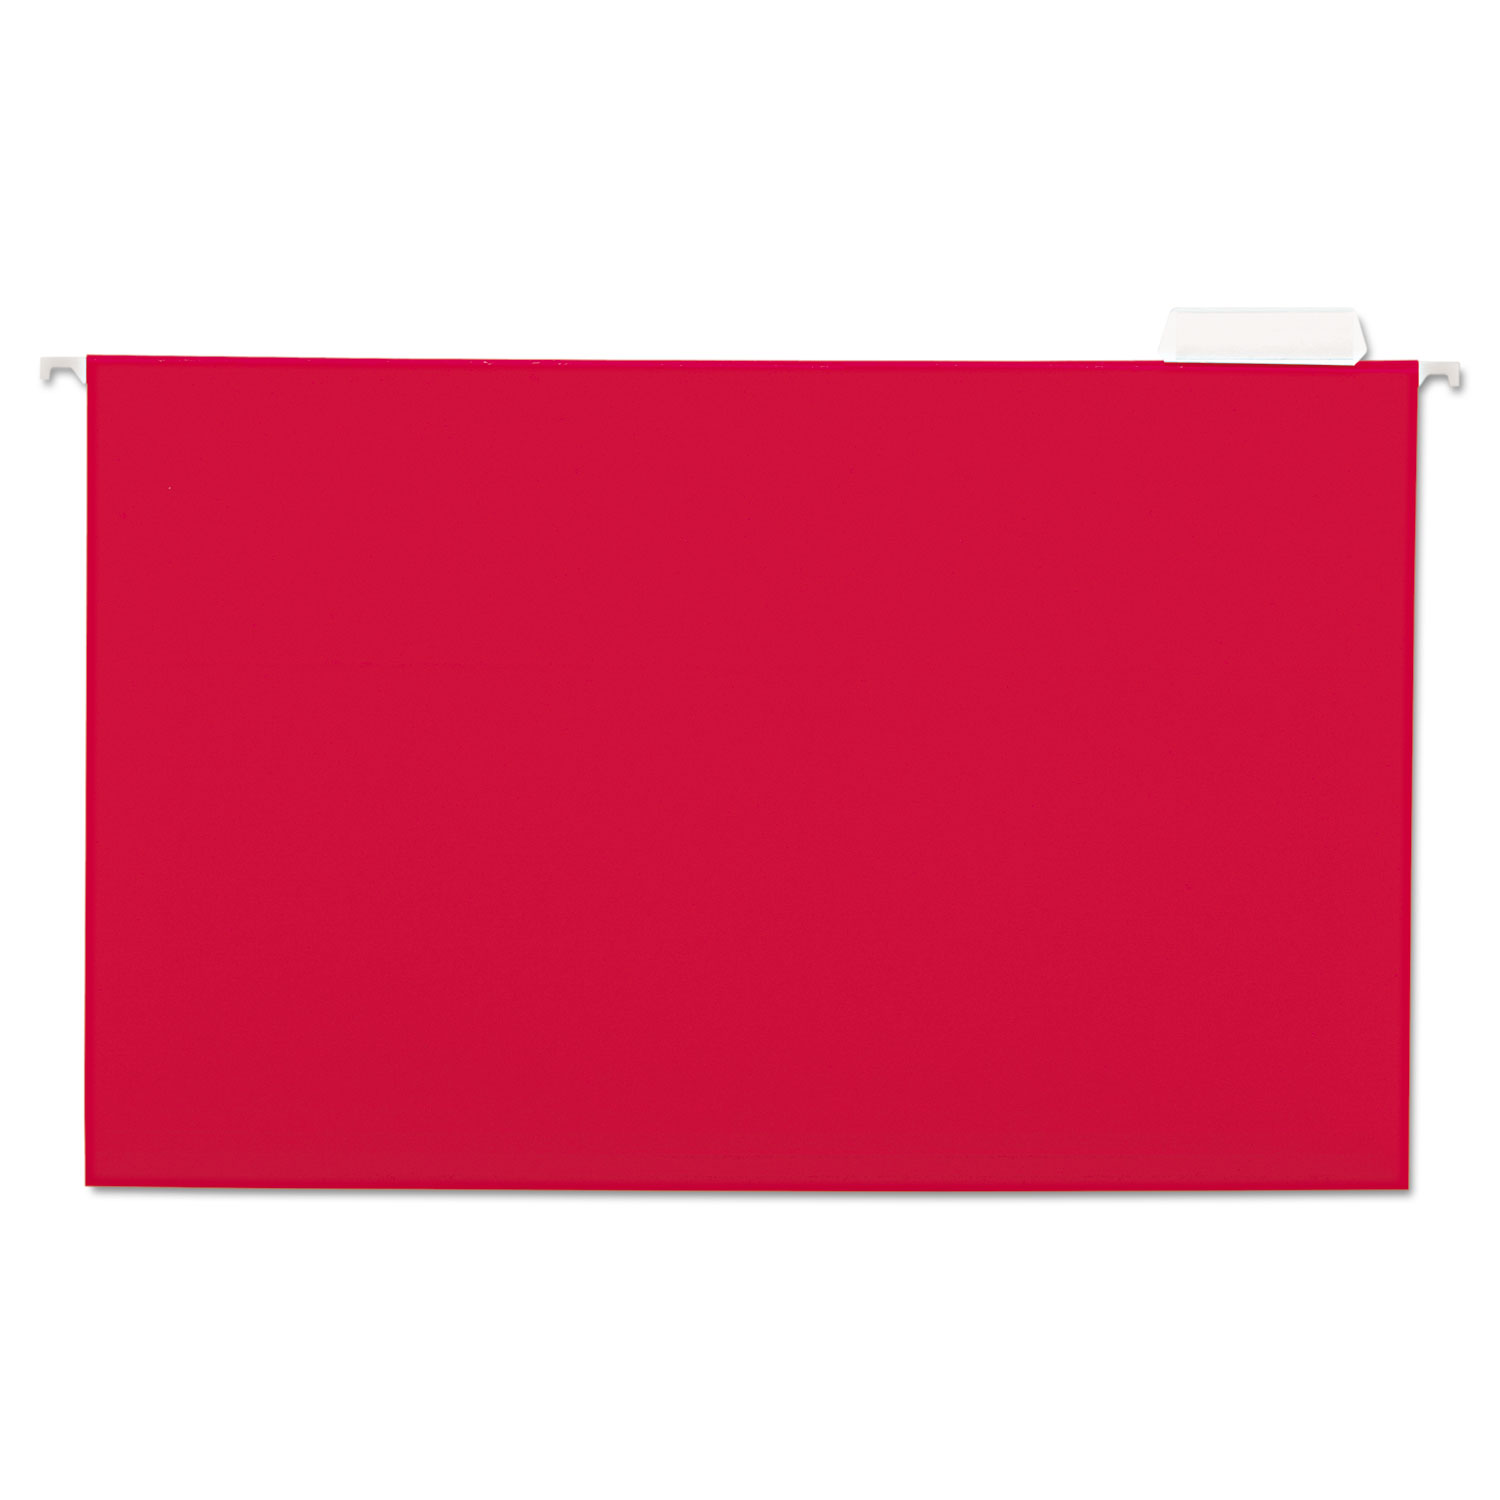 Hanging File Folders, 1/5 Tab, 11 Point Stock, Legal, Red, 25/Box